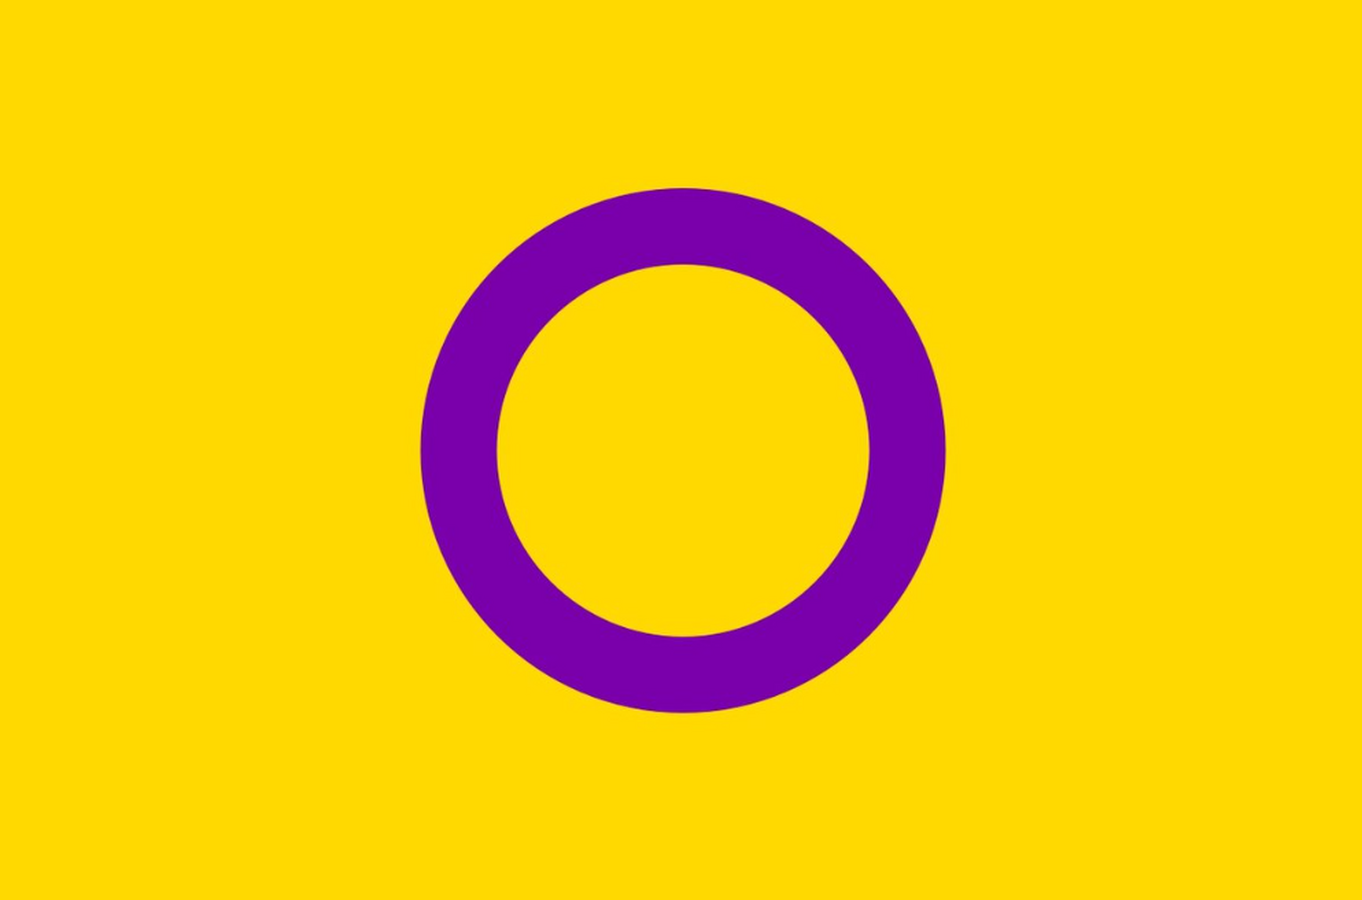 Intersex Pride Flag Detailing a Yellow Background with a Purple Hollow Circle